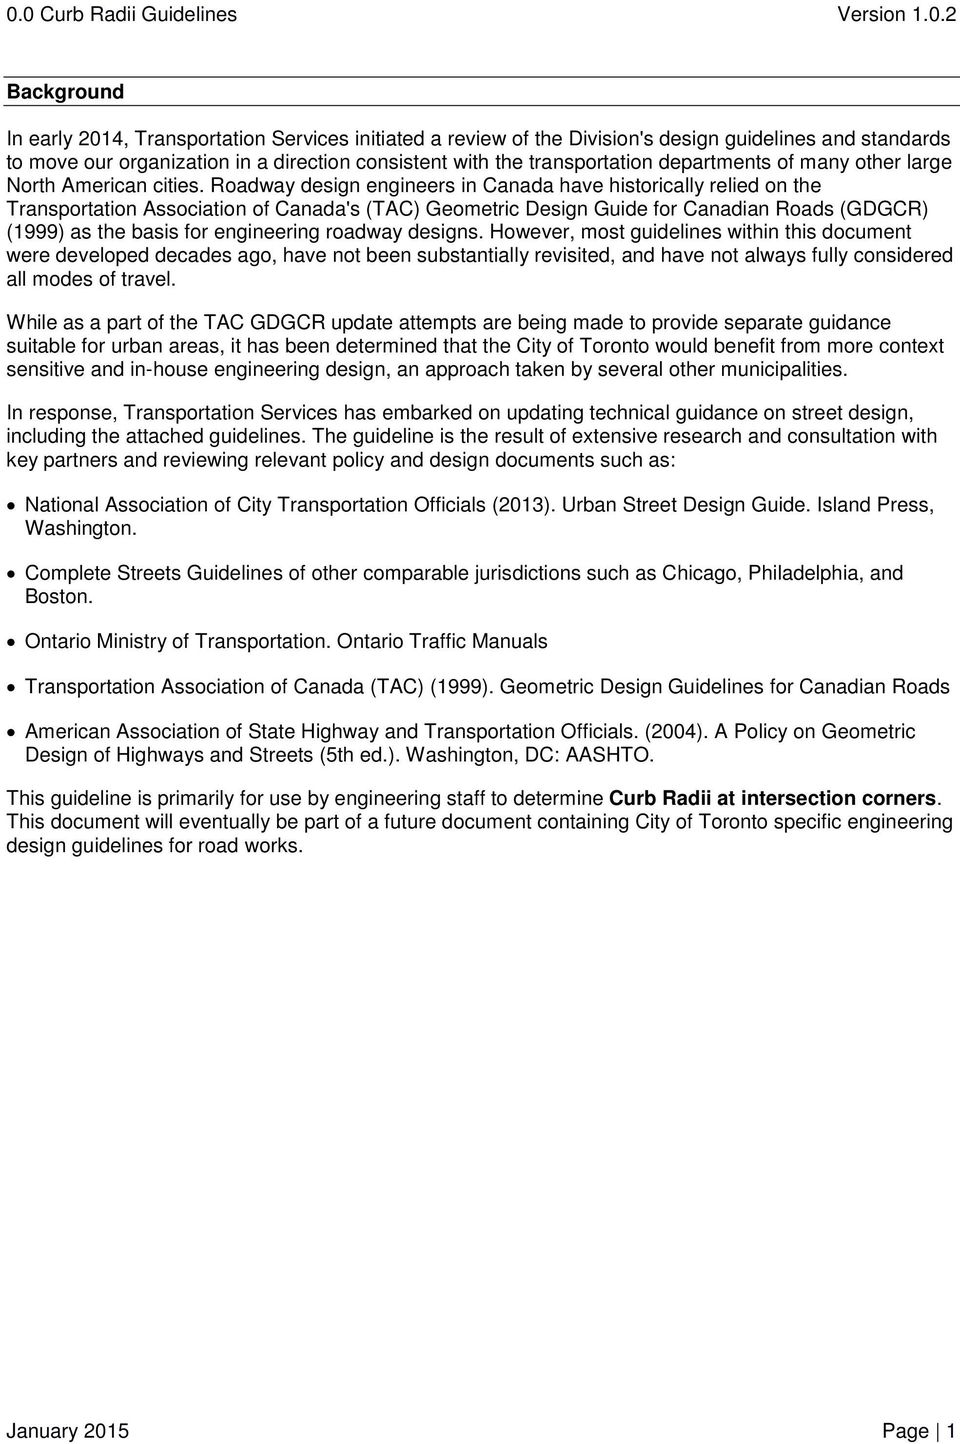 Roadway design engineers in Canada have historically relied on the Transportation Association of Canada's (TAC) Geometric Design Guide for Canadian Roads (GDGCR) (1999) as the basis for engineering